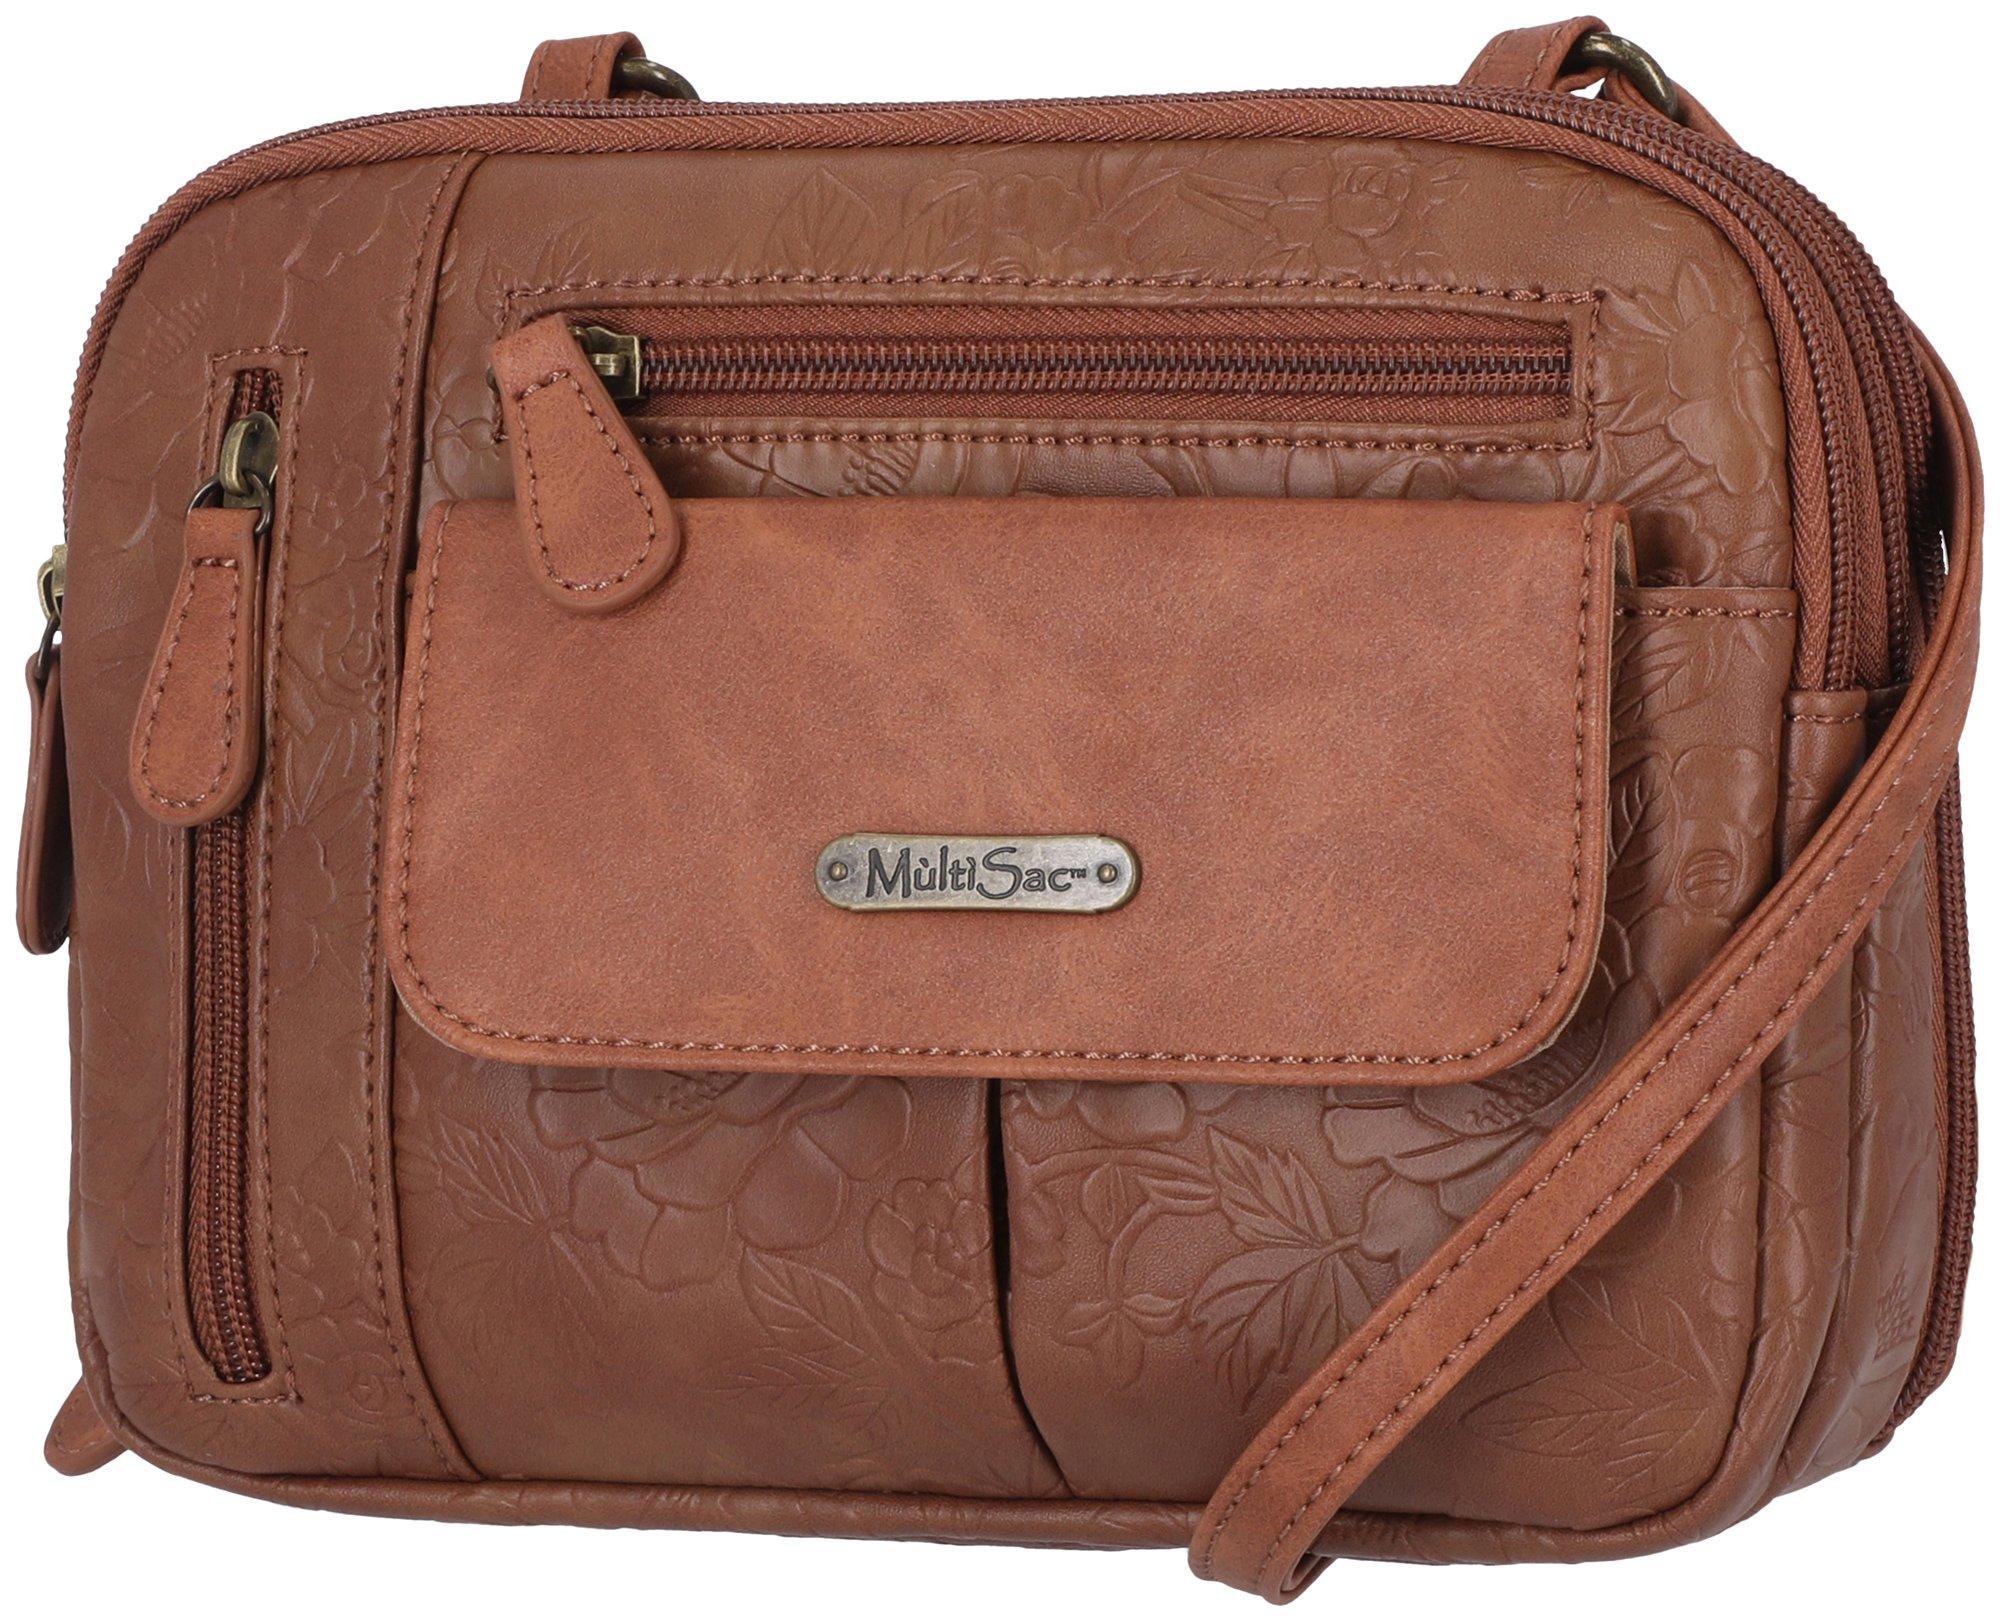 Zippy Triple Compartment Crossbody Bag, Coral Springs